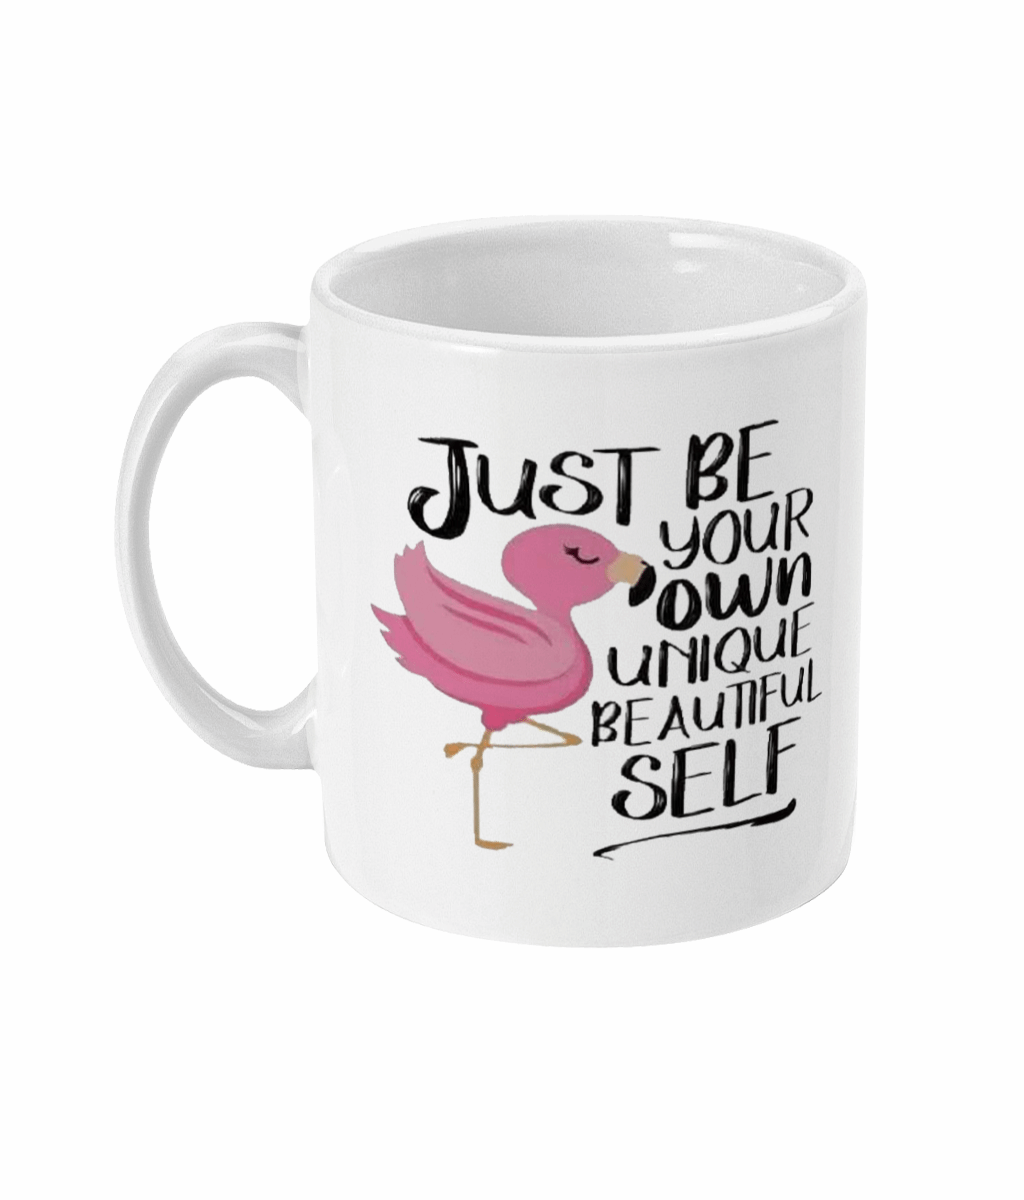  Just be Yourself Mug by Free Spirit Accessories sold by Free Spirit Accessories